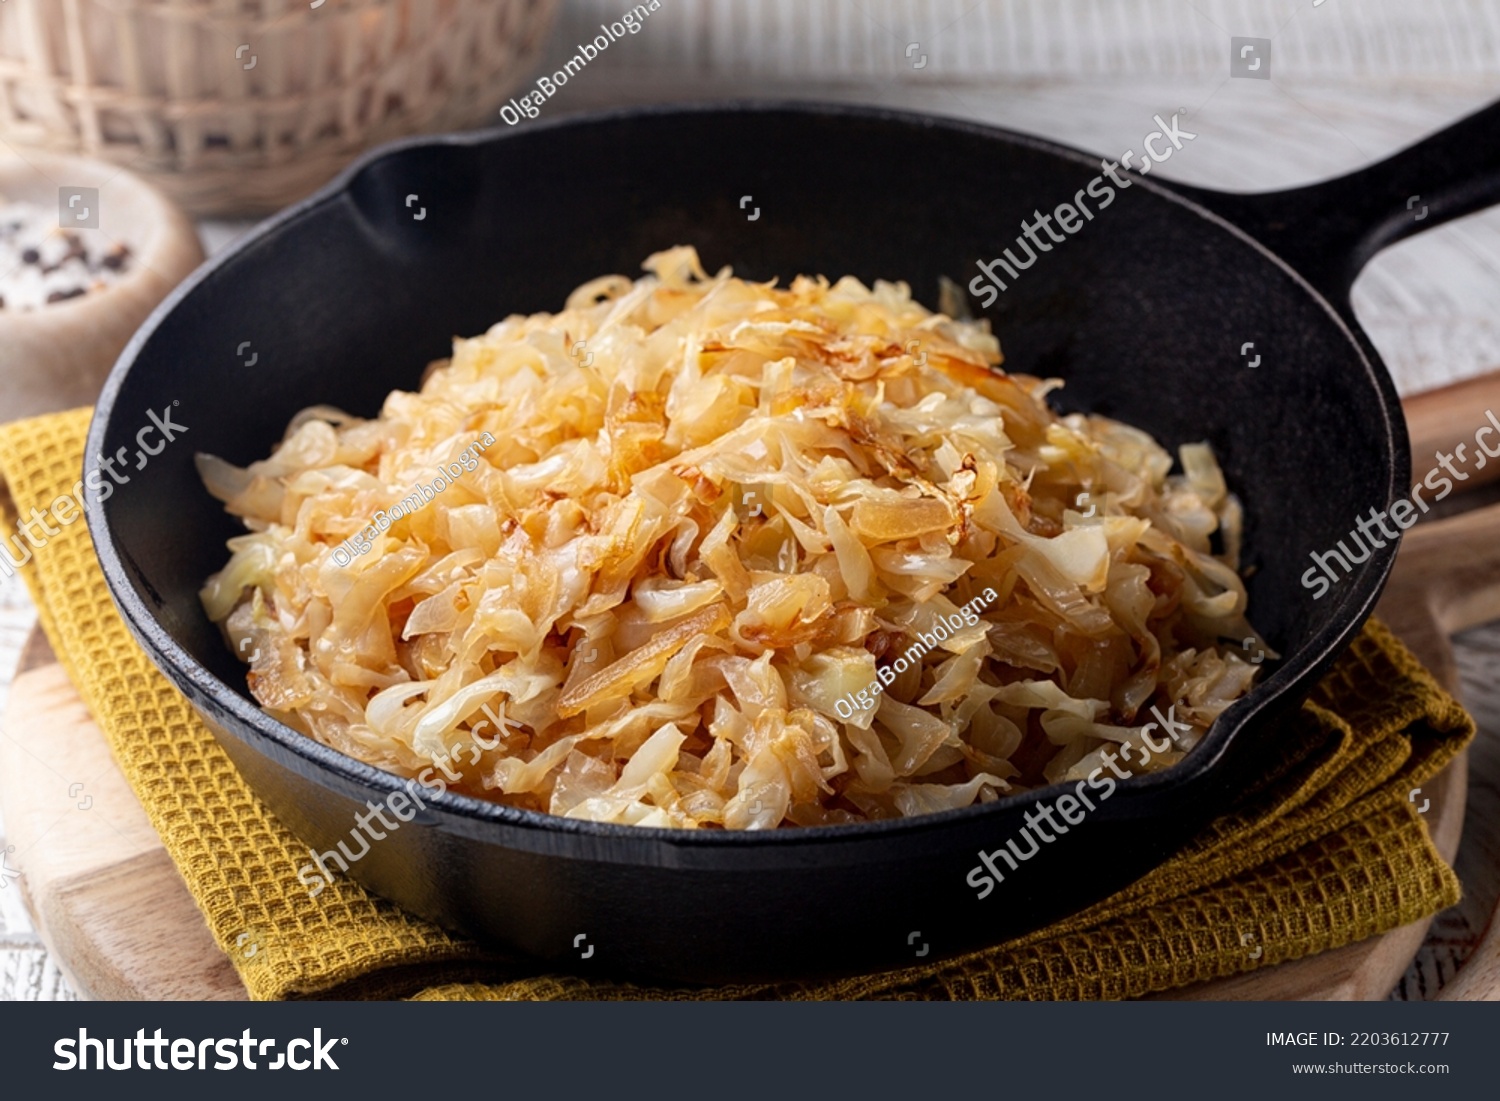 Quick Pan fried Sauerkraut or Crauti. Finely cut white cabbage cooked with fried onion and white wine. Close-up. #2203612777